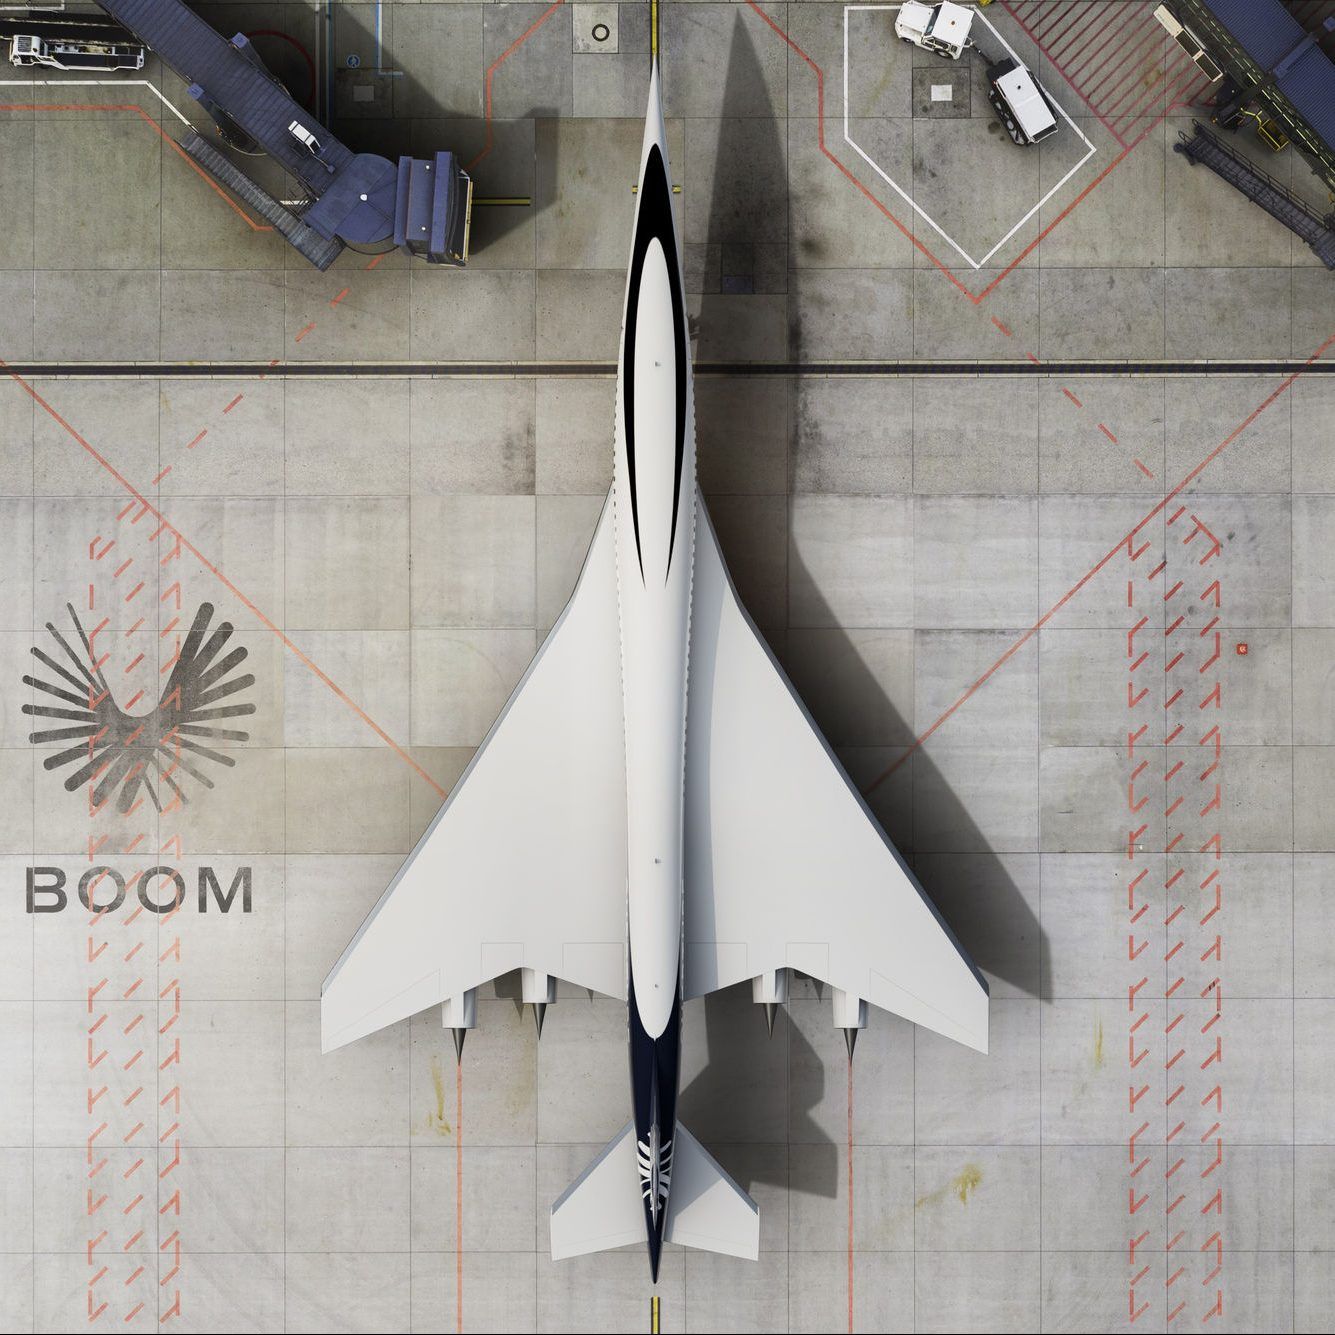 The Return Of Supersonic Travel: What To Expect In The Coming Years